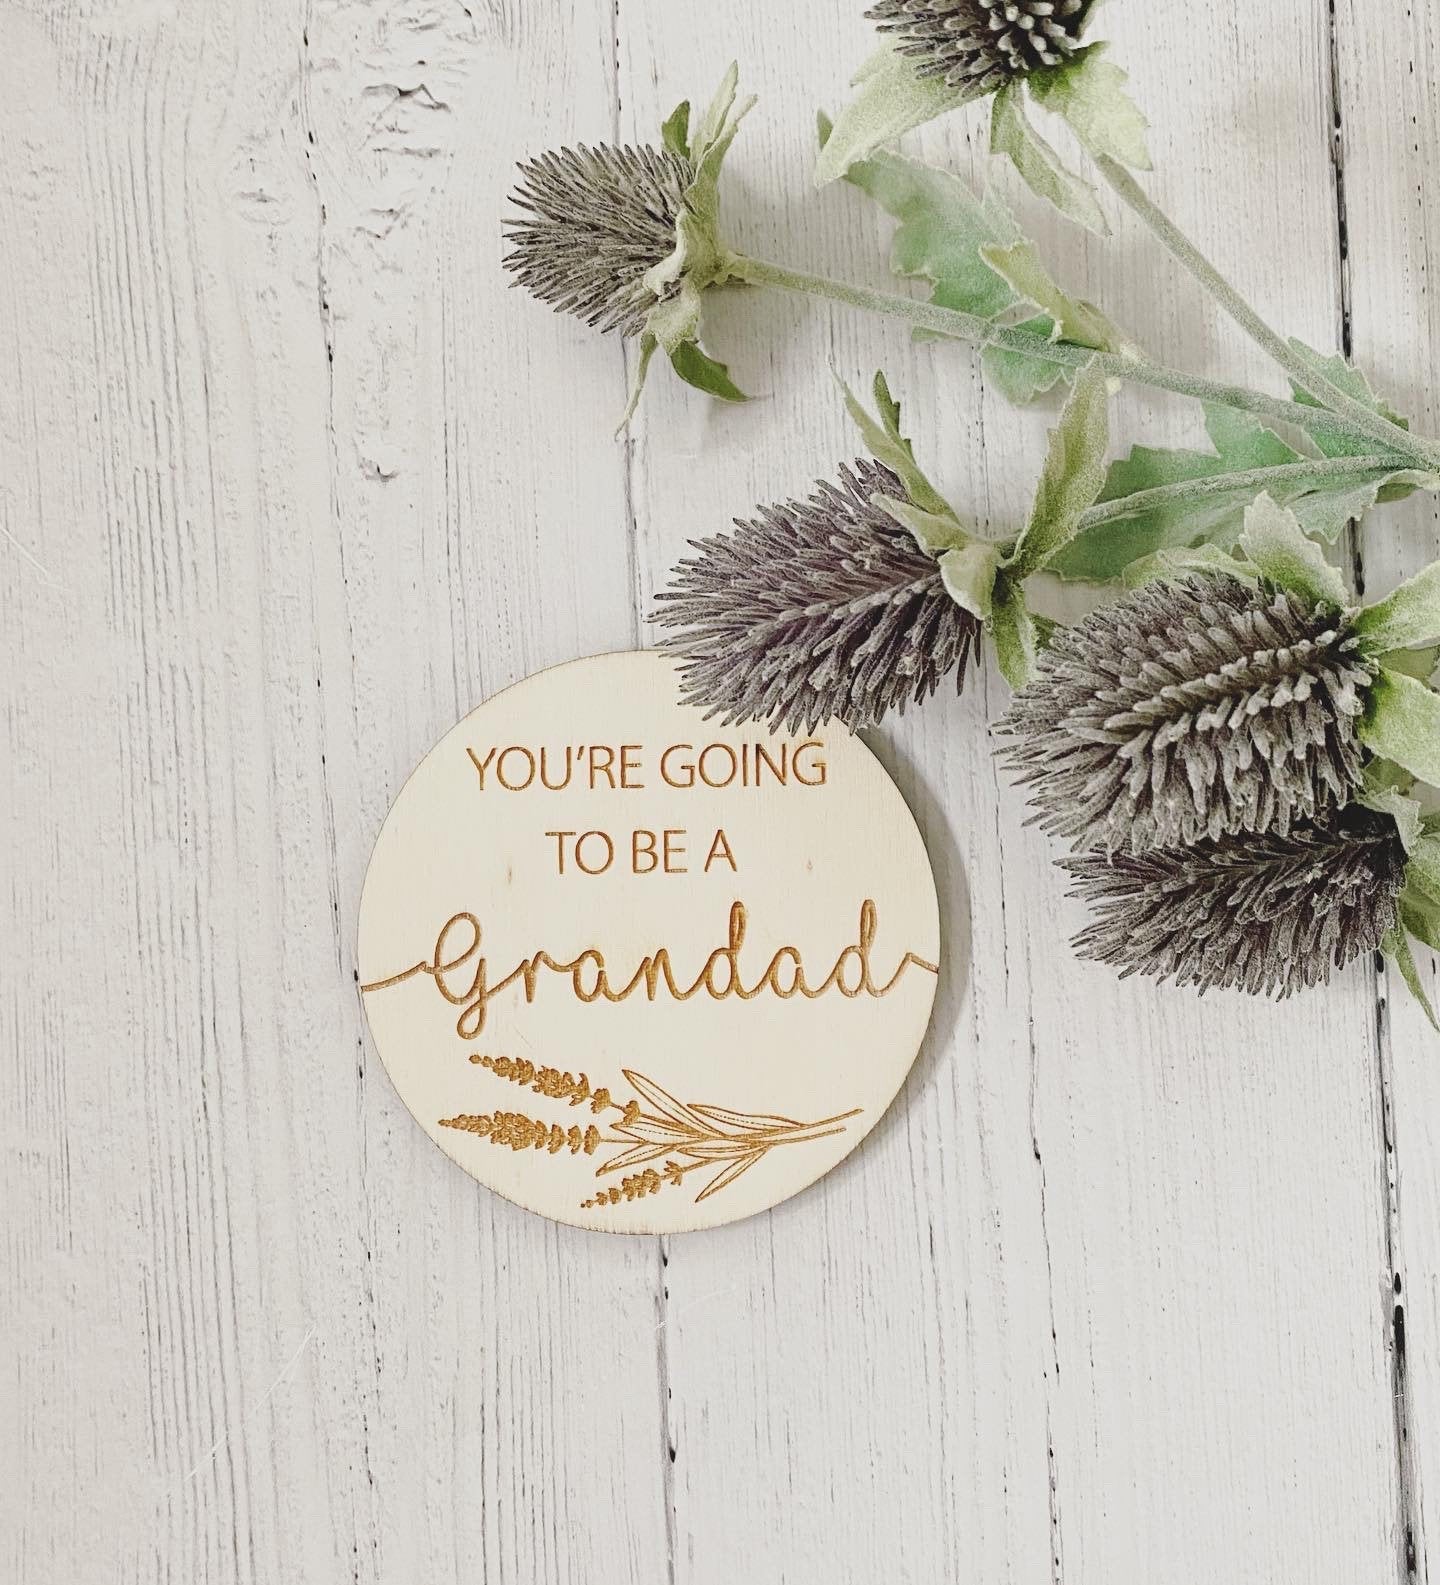 Pregnancy Announcement Plaques | You’re Going To Be A Daddy | Sister| Grandparents | Baby Announcement Photo Props | Boho Photo Props | Wood